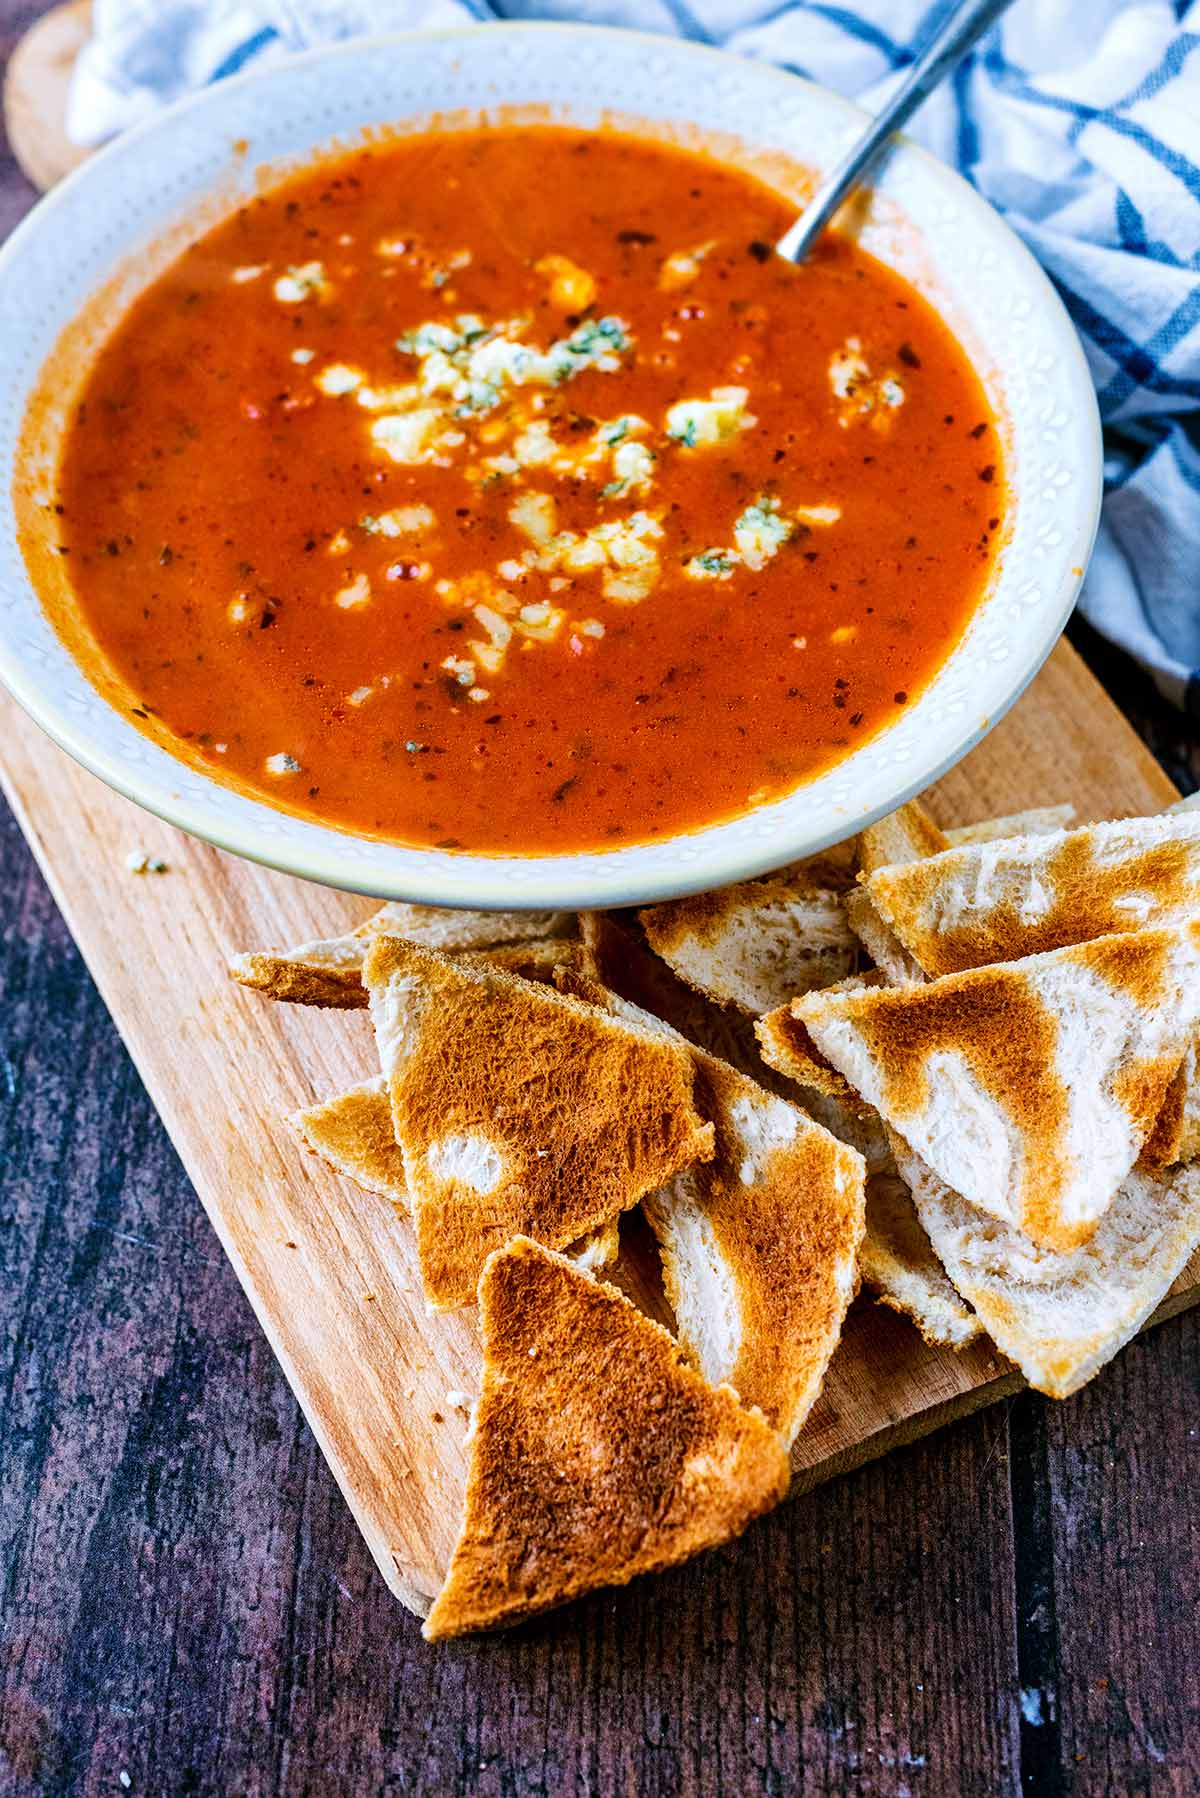 A bowl of tomato soup with some toast triangles in front of it.